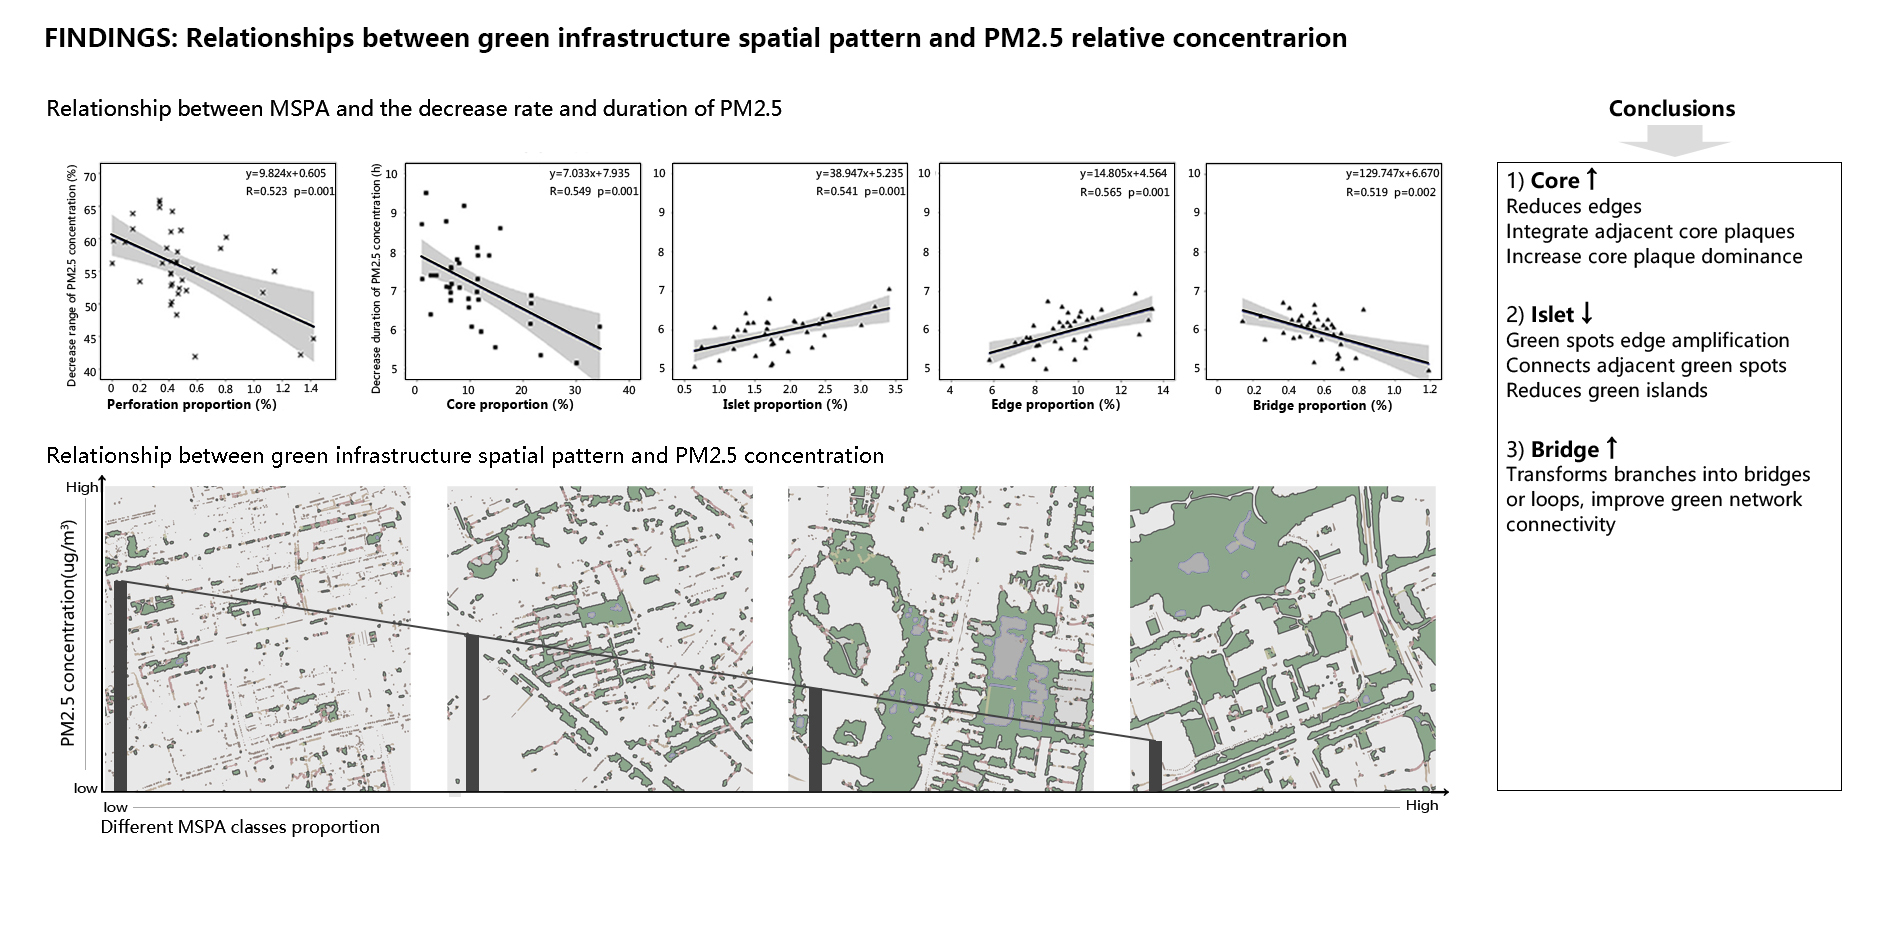 Findings: Relationships between Green infrastructure spatial pattern and PM2.5 relative concentration